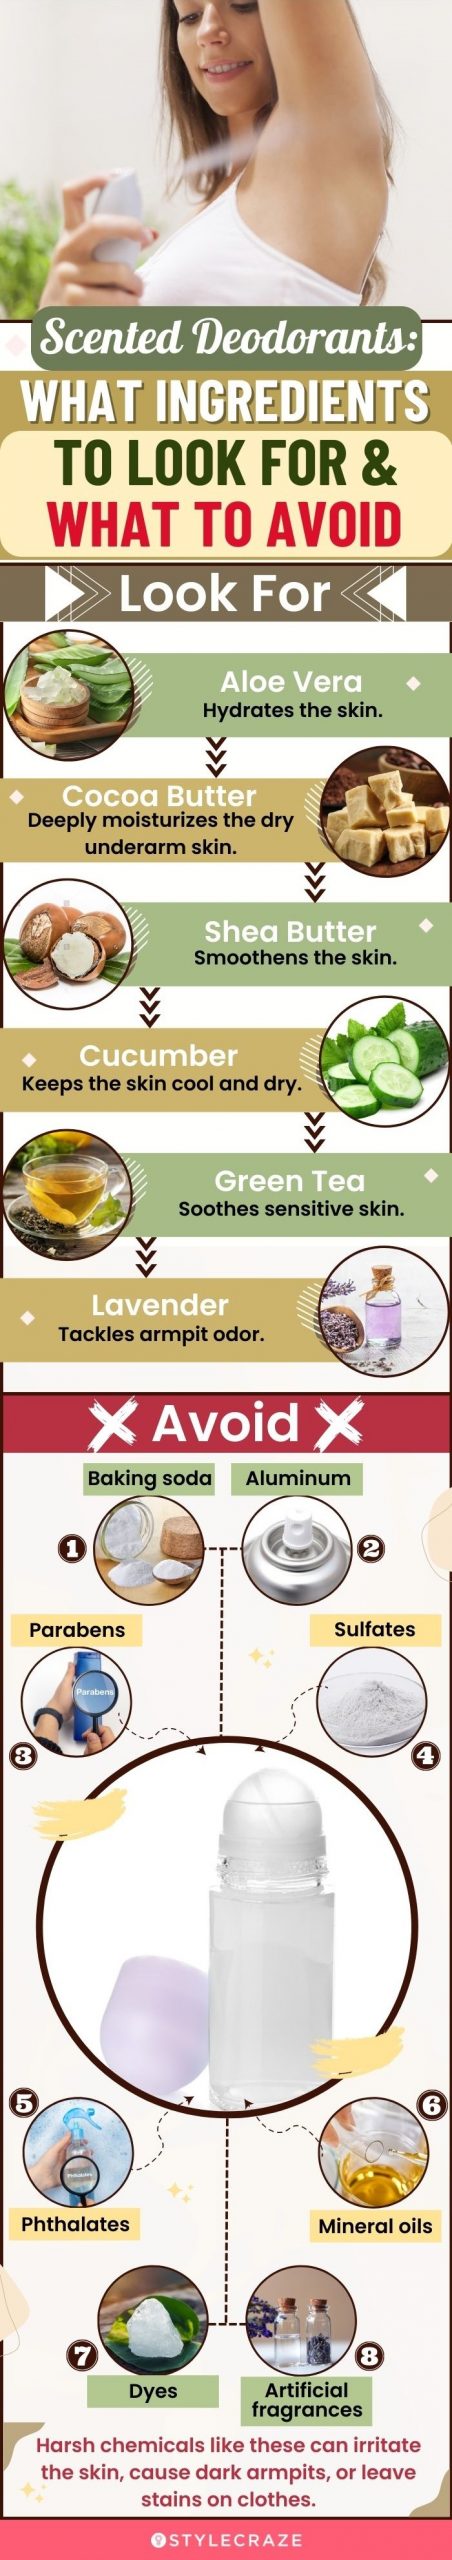 Scented Deodorants: What Ingredients To Look For & What To Avoid (infographic)